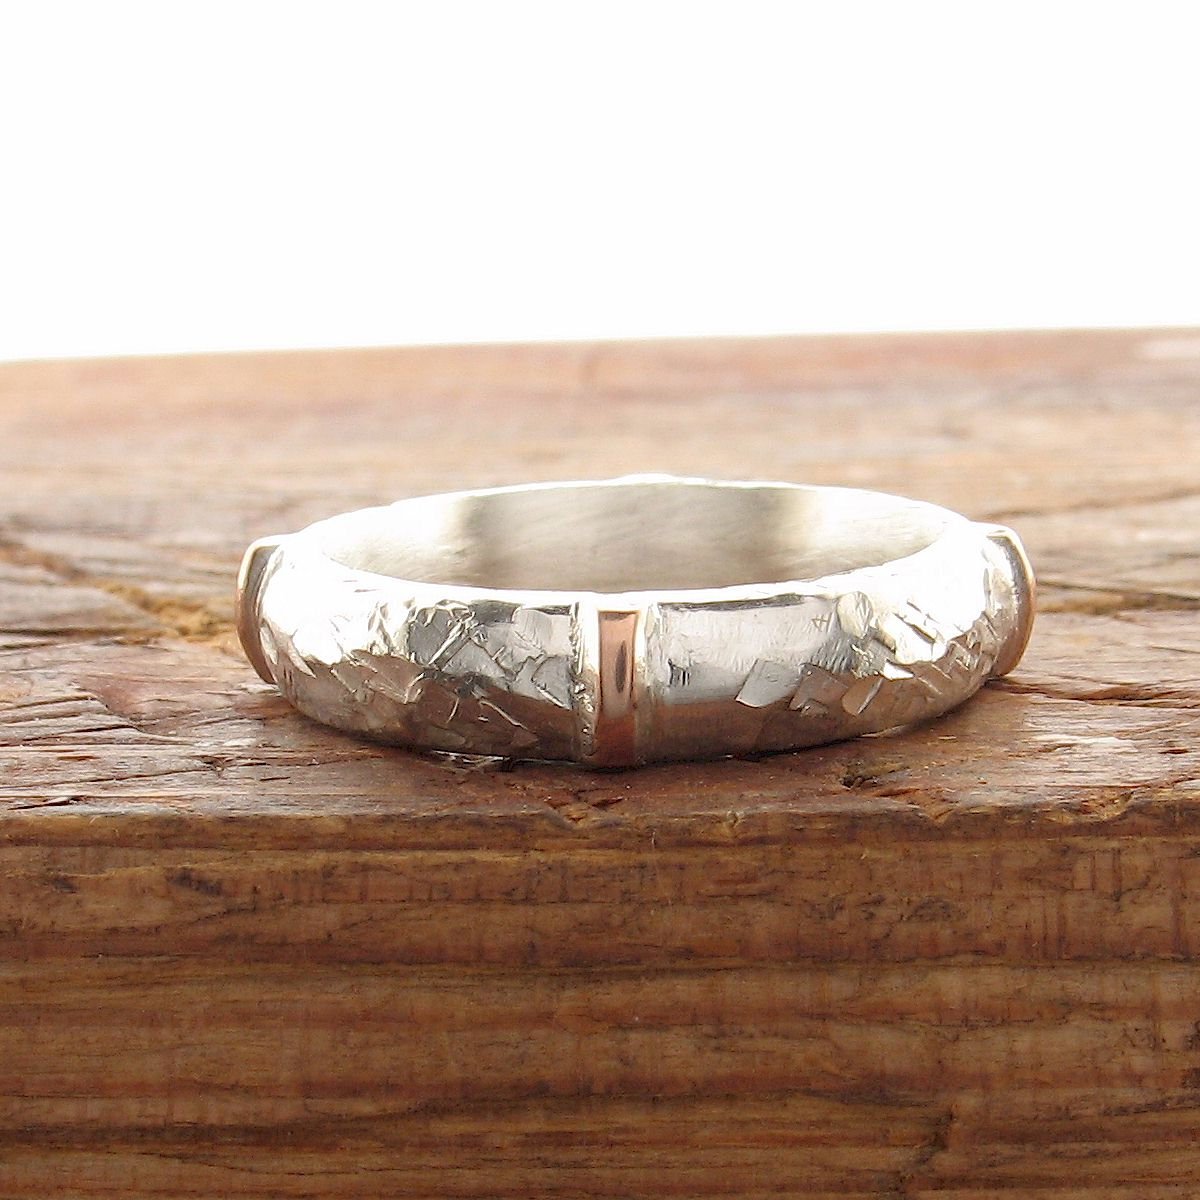 Rustic 4mm wedding ring in rose gold and silver, Lakeland Mine White design - Cumbrian Designs